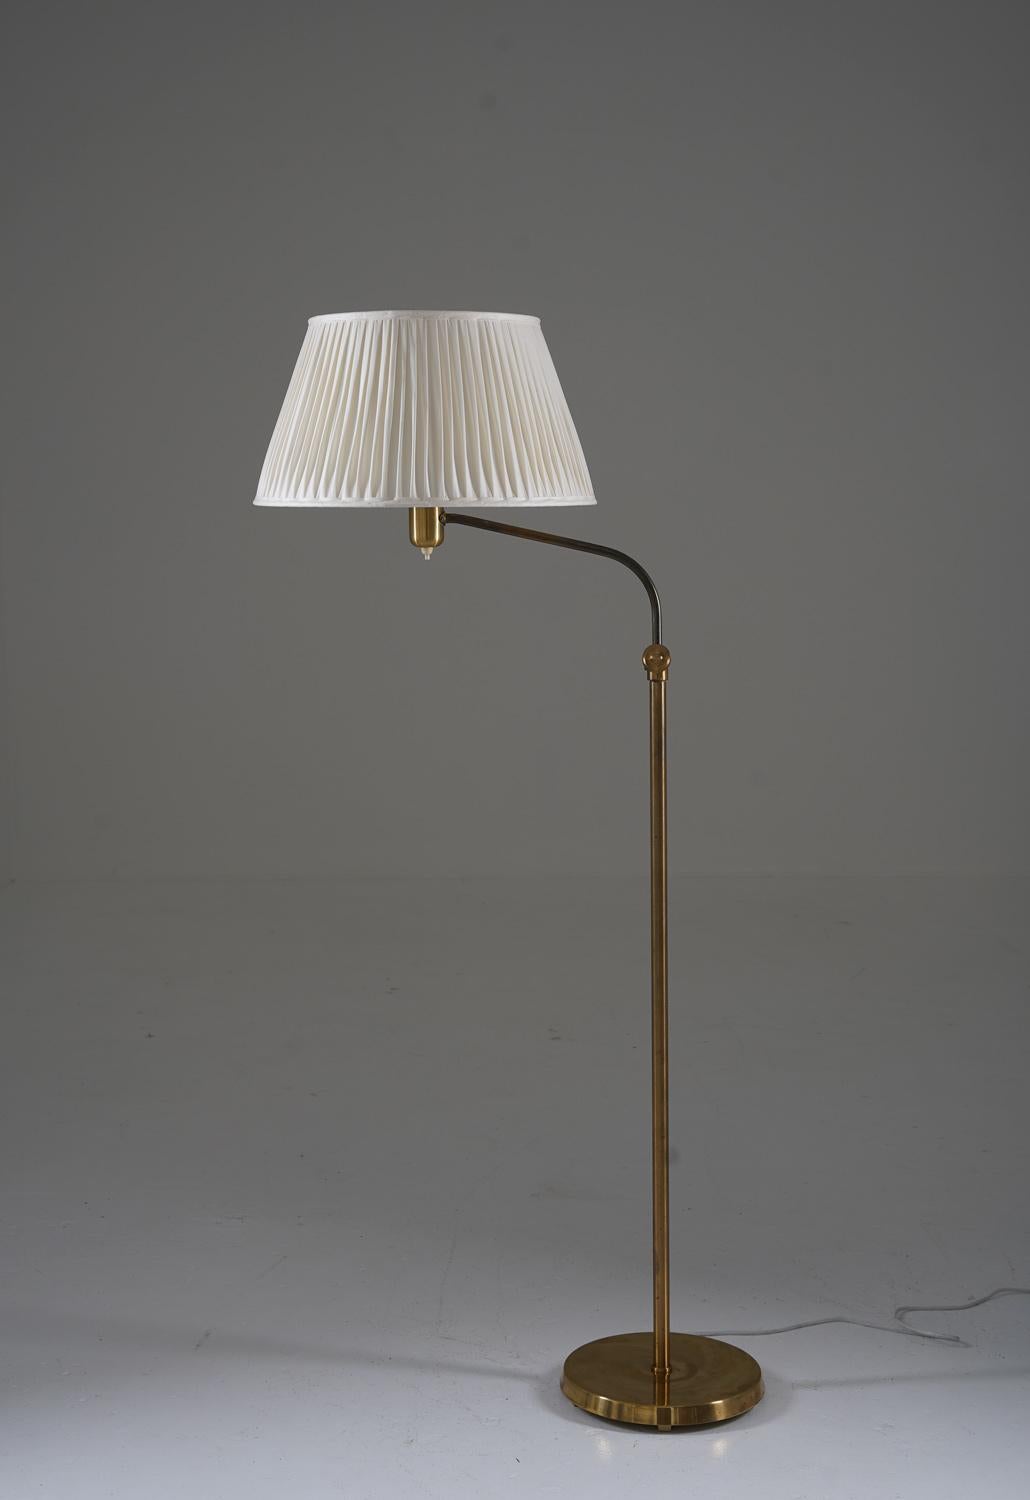 Floor lamp manufactured by ASEA, Sweden, 1940s.
Beautiful floor lamp in solid brass with adjustable height.
Measures: Height 153-177cm
Condition: Good original condition with patina. The lamp comes with a new hand-pleated fabric shade.
 